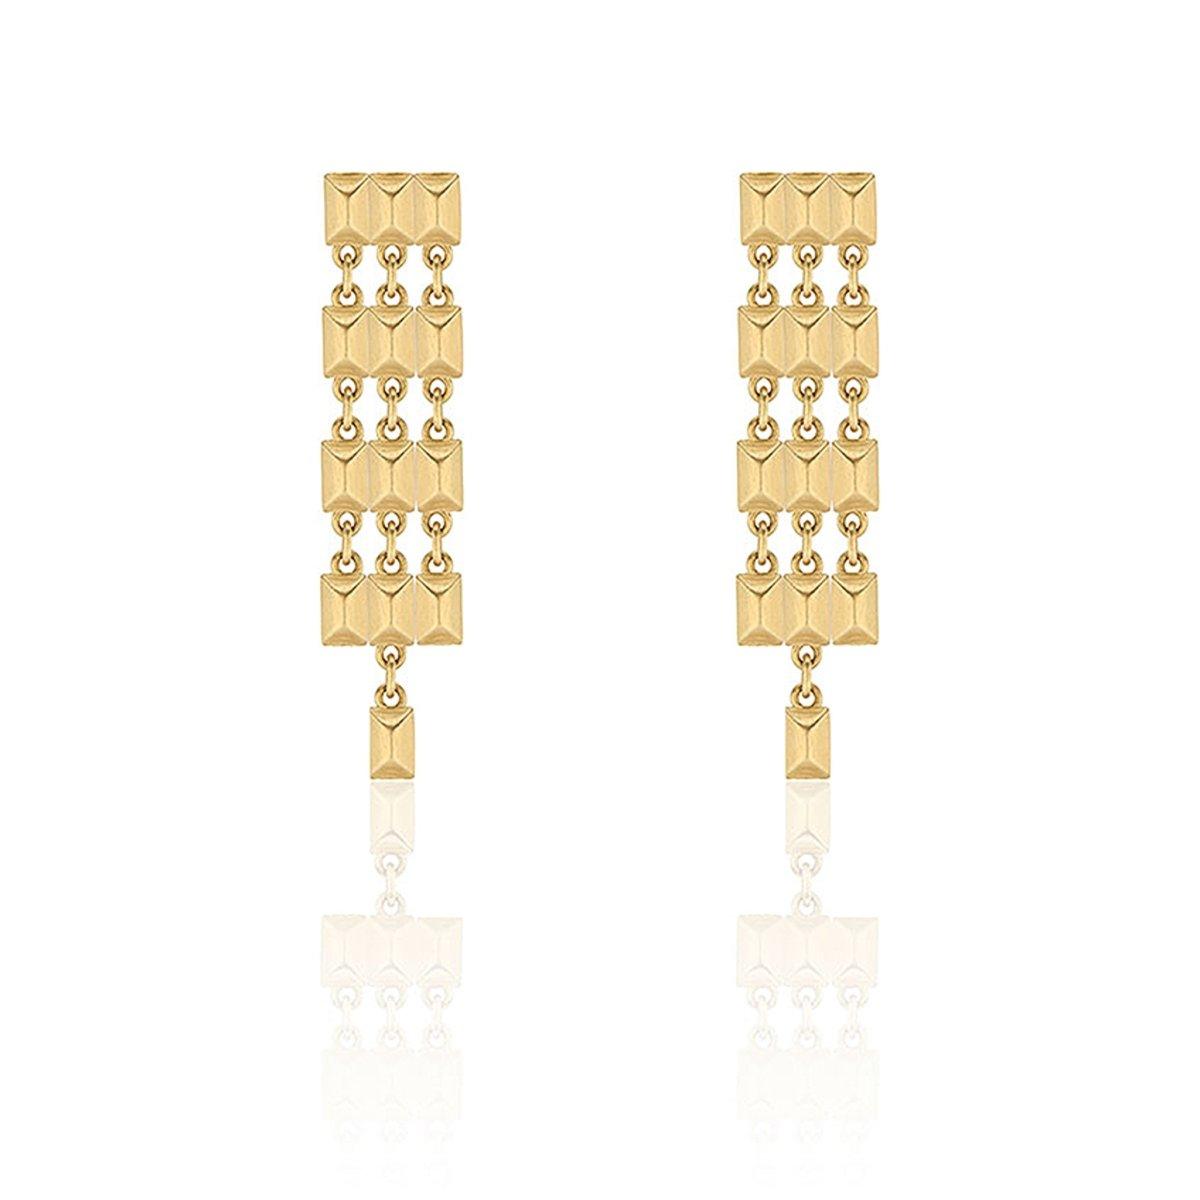 Gold Sparks Fly Chandelier Earrings - Nataly Aponte